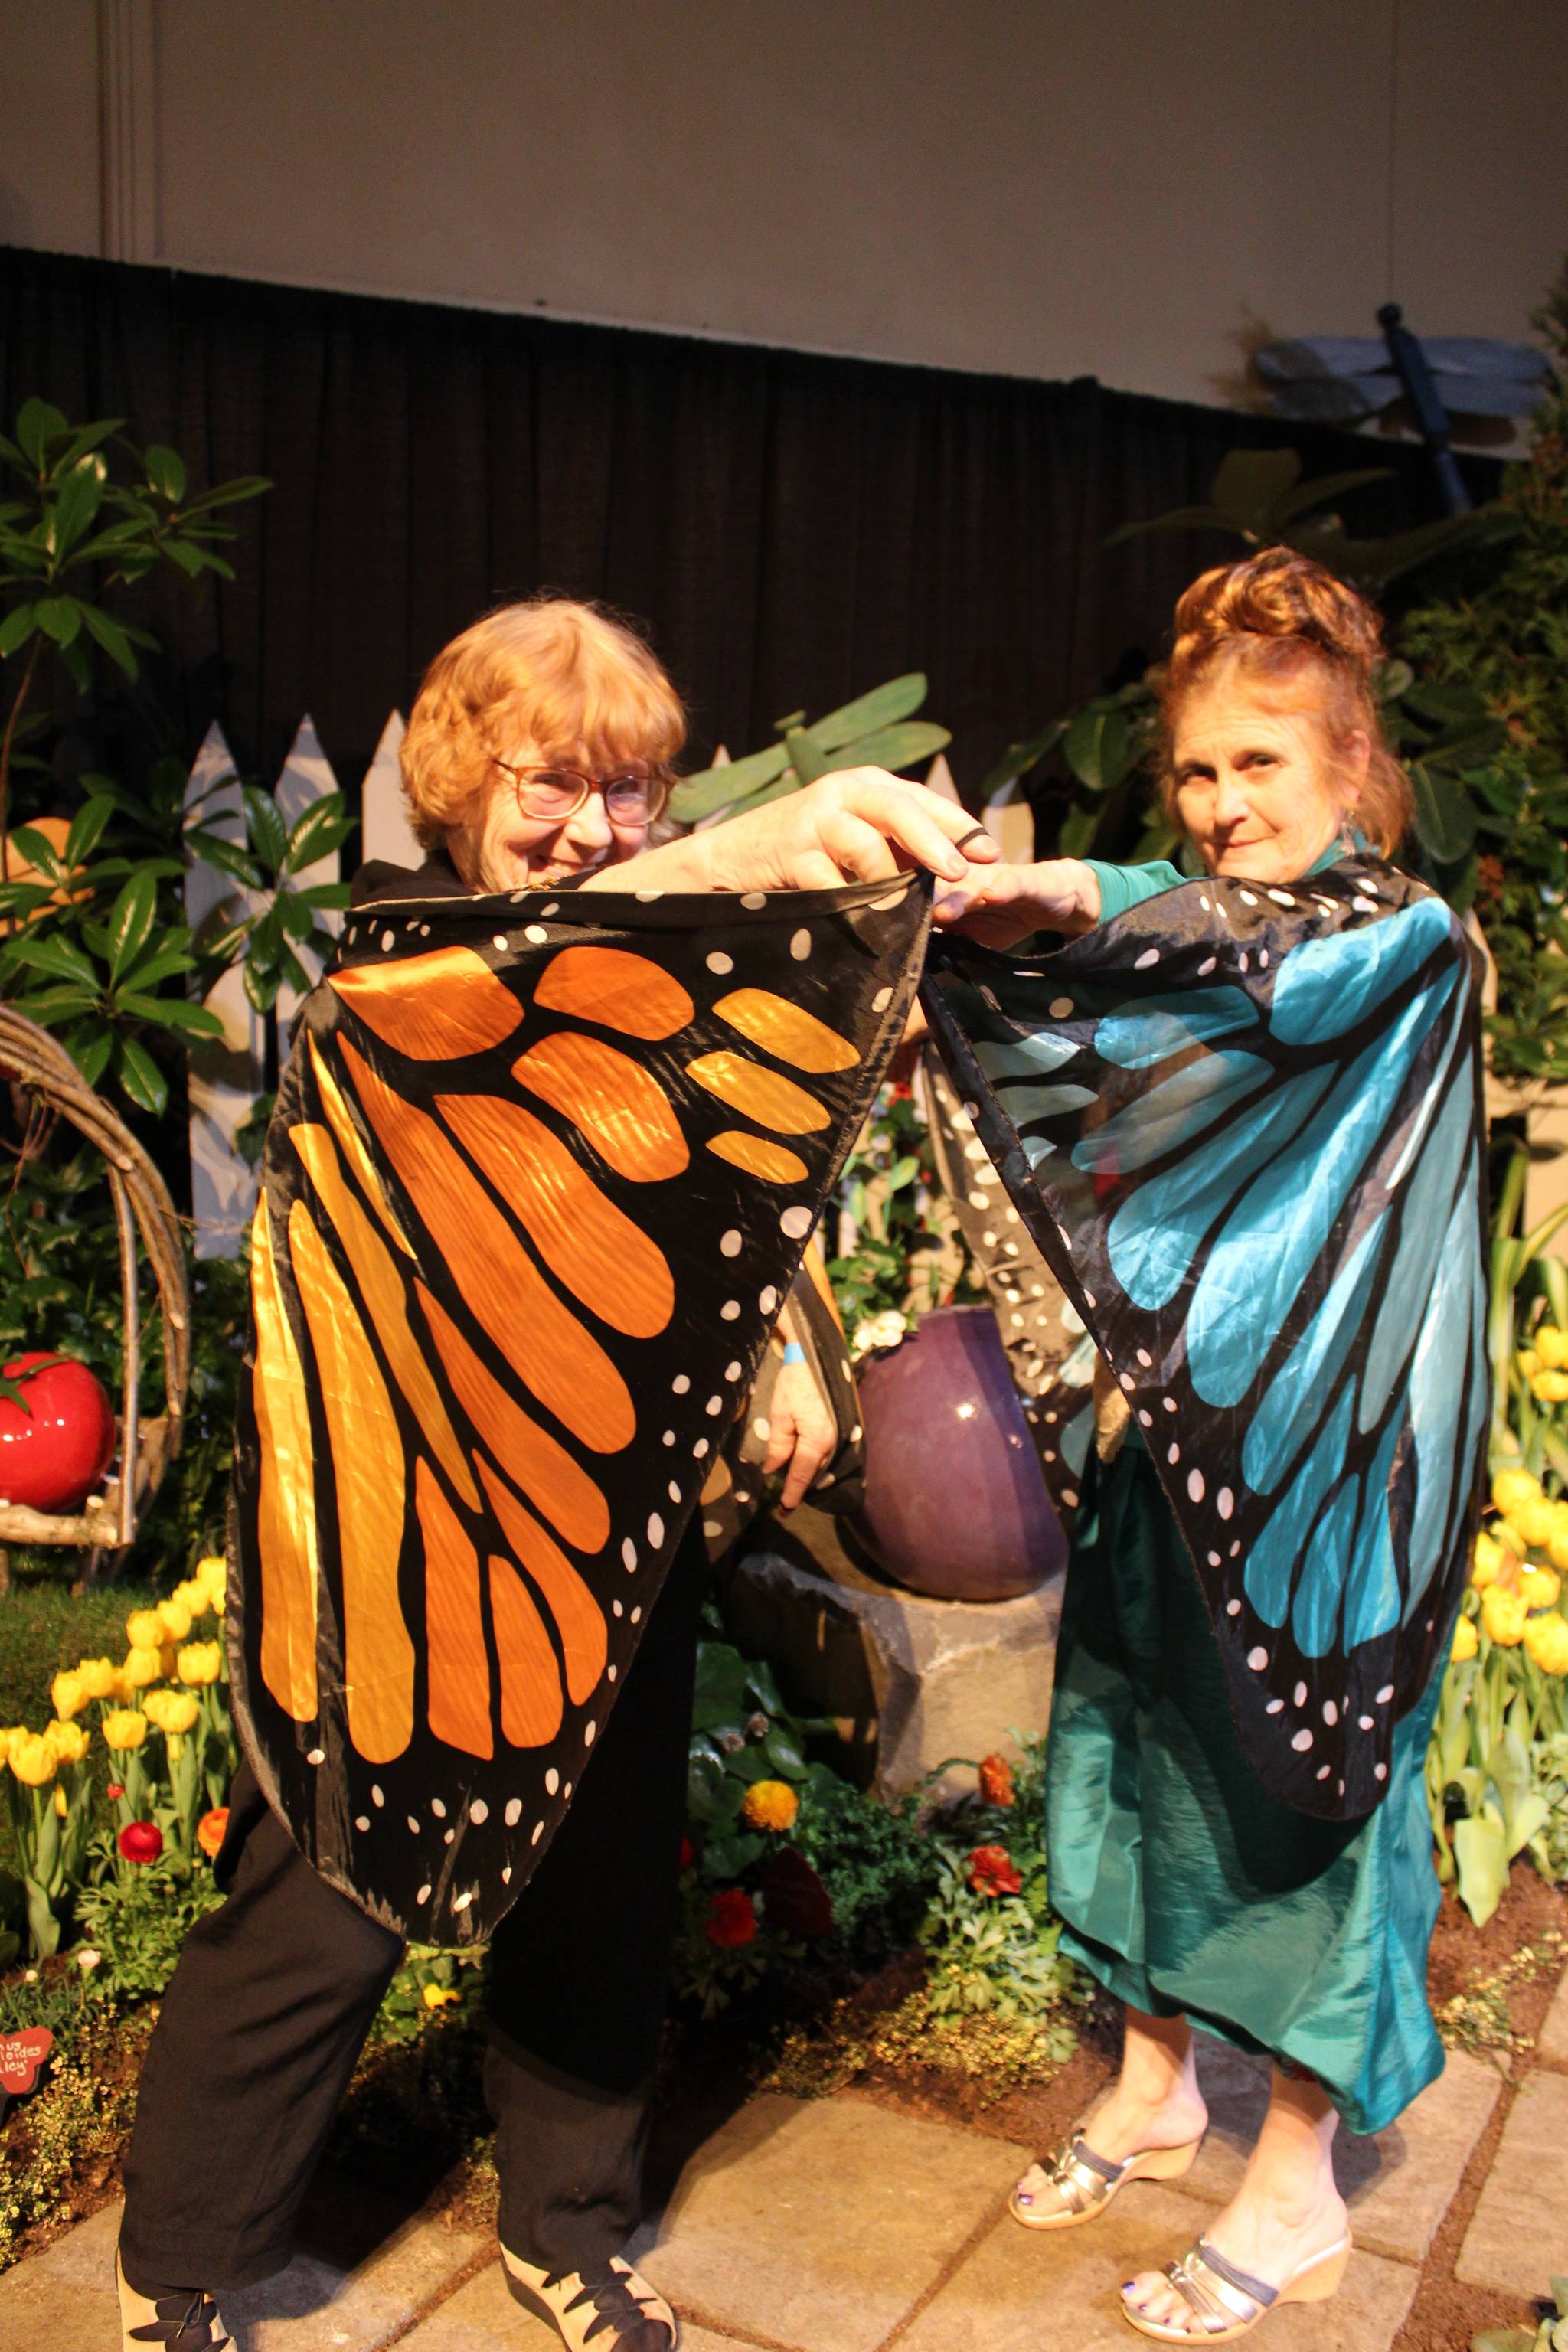 As part of their annual appearance at the Northwest Flower & Garden Show, Vanca Lumsden (left) and Judith Jones always get into character for their displays. This year, they flitted around as butterflies as part of their theme, Bugs Abode: Life Under the Lettuce Leaf. Photo by Patricia Guthrie/Whidbey News-Times